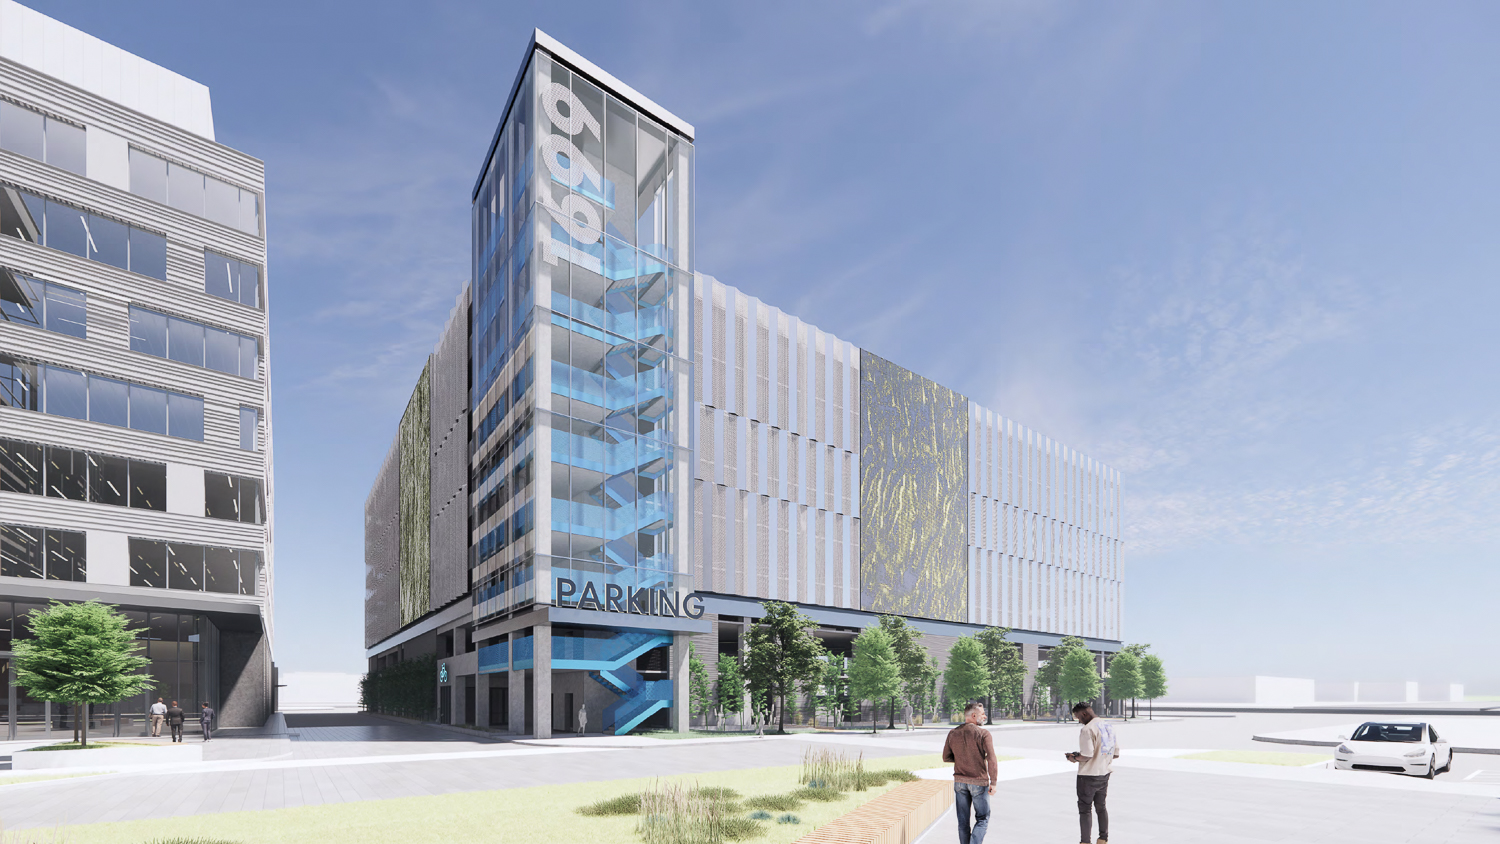 1699 & 1701 Bayshore Highway parking structure, rendering by Perkins&Will